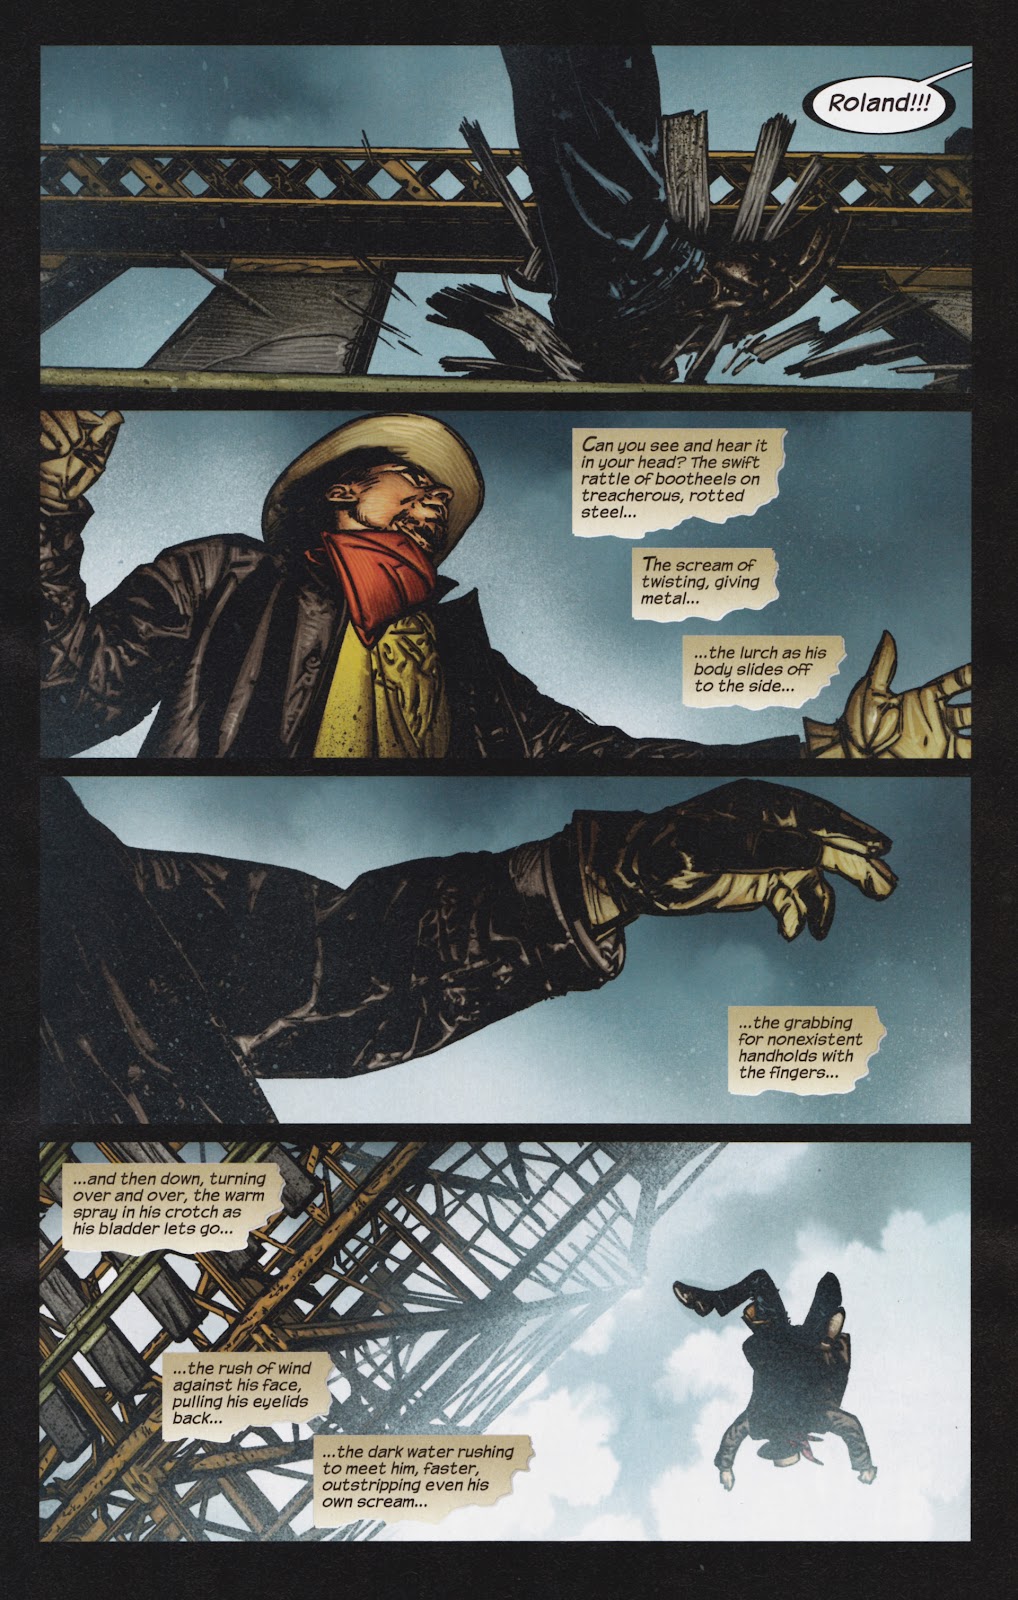 Dark Tower: The Gunslinger - The Man in Black issue 4 - Page 16